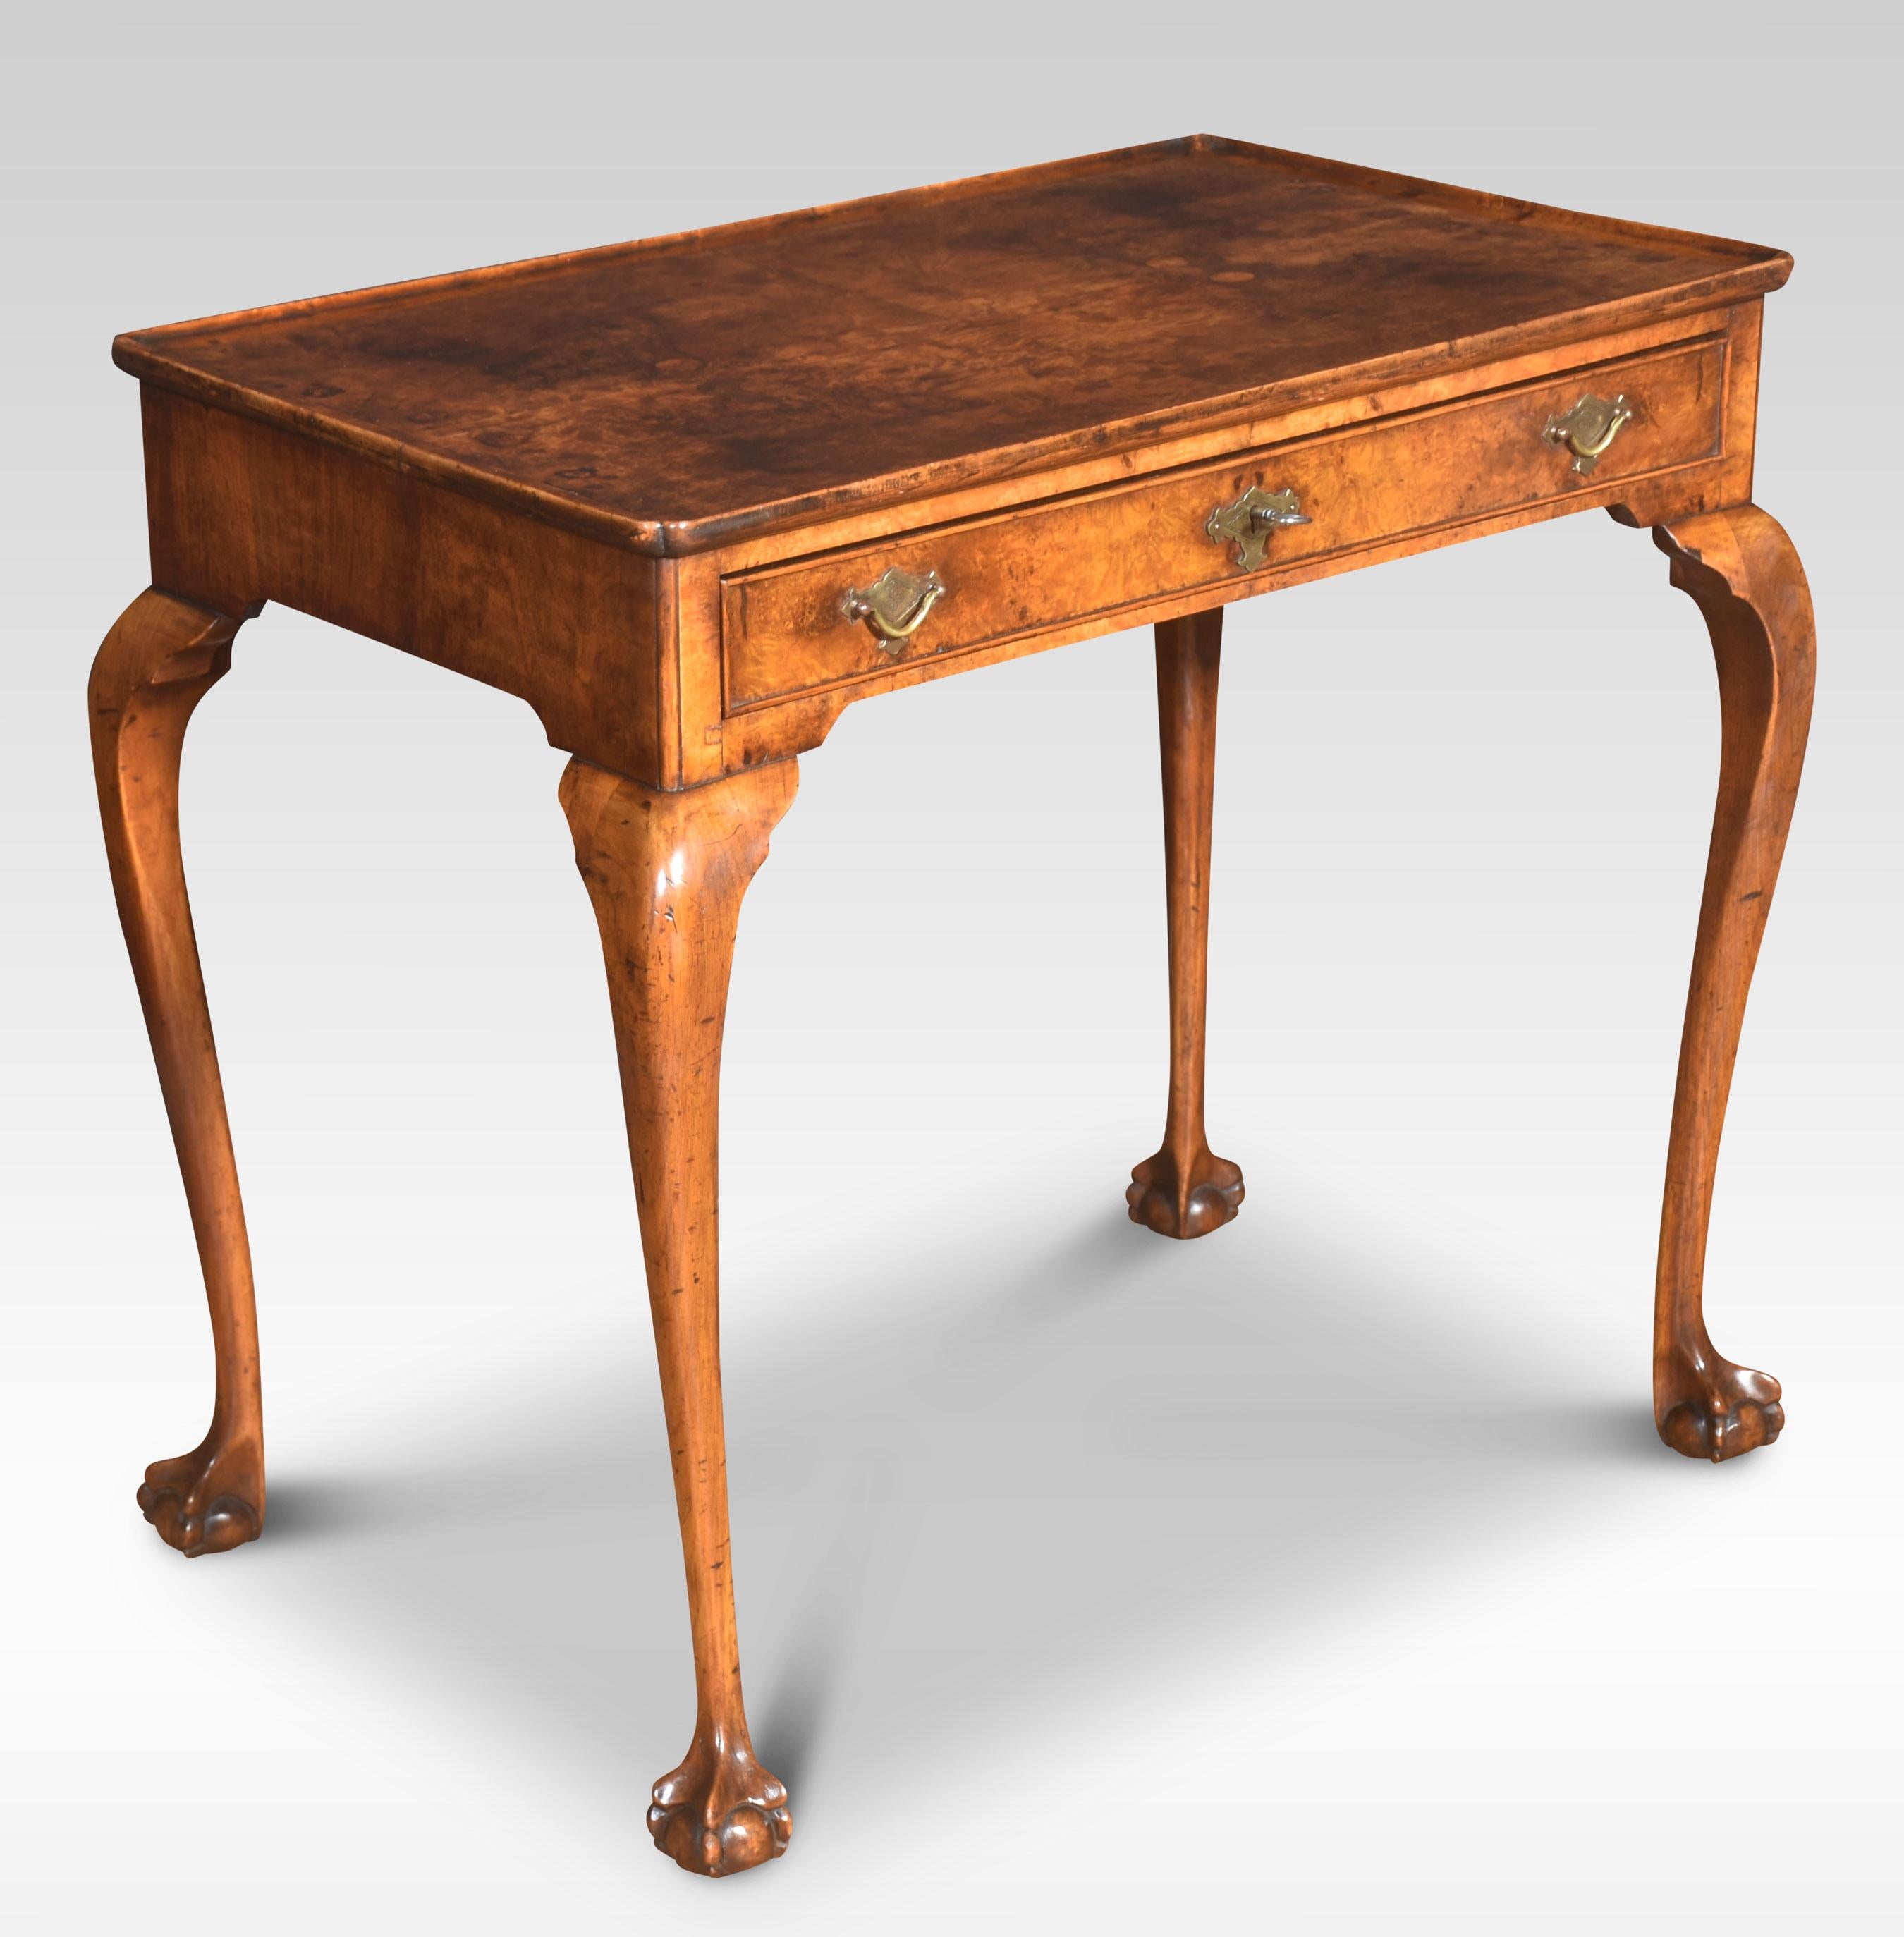 Figured walnut silver table in George I taste, the moulded rectangular top with re-entrant corners, over single frieze drawer with brass handles and engraved escutcheon. All raised up on slender cabriole supports terminating in claws and ball